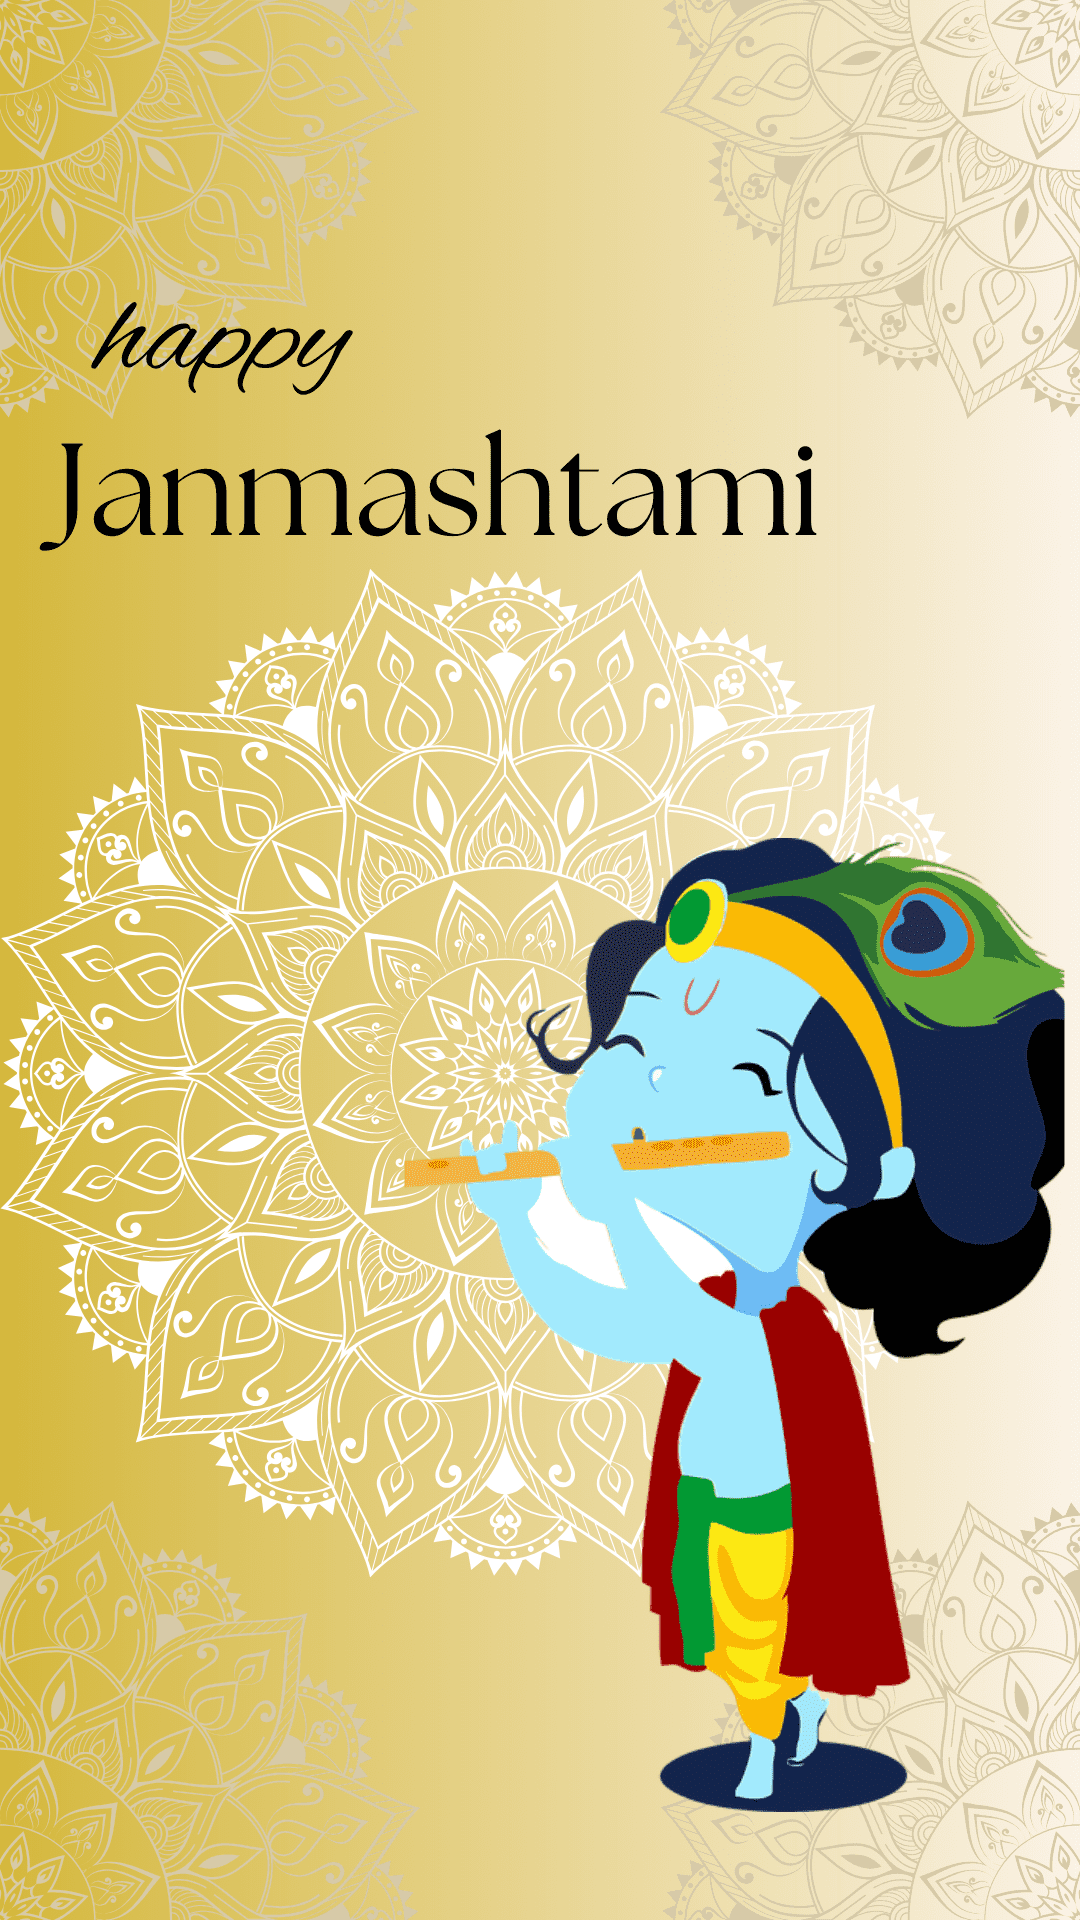 #{"id":1619,"_id":"61f3f785e0f744570541c3c4","name":"krishna-janmashtami","count":1,"data":"{\"_id\":{\"$oid\":\"61f3f785e0f744570541c3c4\"},\"id\":\"891\",\"name\":\"krishna-janmashtami\",\"created_at\":\"2021-08-26-13:32:36\",\"updated_at\":\"2021-08-26-13:32:36\",\"updatedAt\":{\"$date\":\"2022-01-28T14:33:44.933Z\"},\"count\":1}","deleted_at":null,"created_at":"2021-08-26T01:32:36.000000Z","updated_at":"2021-08-26T01:32:36.000000Z","merge_with":null,"pivot":{"taggable_id":2313,"tag_id":1619,"taggable_type":"App\\Models\\Status"}}, #{"id":2487,"_id":null,"name":"radha-krishna","count":0,"data":null,"deleted_at":null,"created_at":"2023-09-04T09:42:29.000000Z","updated_at":"2023-09-04T09:42:29.000000Z","merge_with":null,"pivot":{"taggable_id":2313,"tag_id":2487,"taggable_type":"App\\Models\\Status"}}, #{"id":2484,"_id":null,"name":"janmashtami--quotes","count":0,"data":null,"deleted_at":null,"created_at":"2023-09-04T09:38:20.000000Z","updated_at":"2023-09-04T09:38:20.000000Z","merge_with":null,"pivot":{"taggable_id":2313,"tag_id":2484,"taggable_type":"App\\Models\\Status"}}, #{"id":2485,"_id":null,"name":"janmashtami--status","count":0,"data":null,"deleted_at":null,"created_at":"2023-09-04T09:38:20.000000Z","updated_at":"2023-09-04T09:38:20.000000Z","merge_with":null,"pivot":{"taggable_id":2313,"tag_id":2485,"taggable_type":"App\\Models\\Status"}}, #{"id":2488,"_id":null,"name":"janmashtami-wishes","count":0,"data":null,"deleted_at":null,"created_at":"2023-09-04T09:42:29.000000Z","updated_at":"2023-09-04T09:42:29.000000Z","merge_with":null,"pivot":{"taggable_id":2313,"tag_id":2488,"taggable_type":"App\\Models\\Status"}}